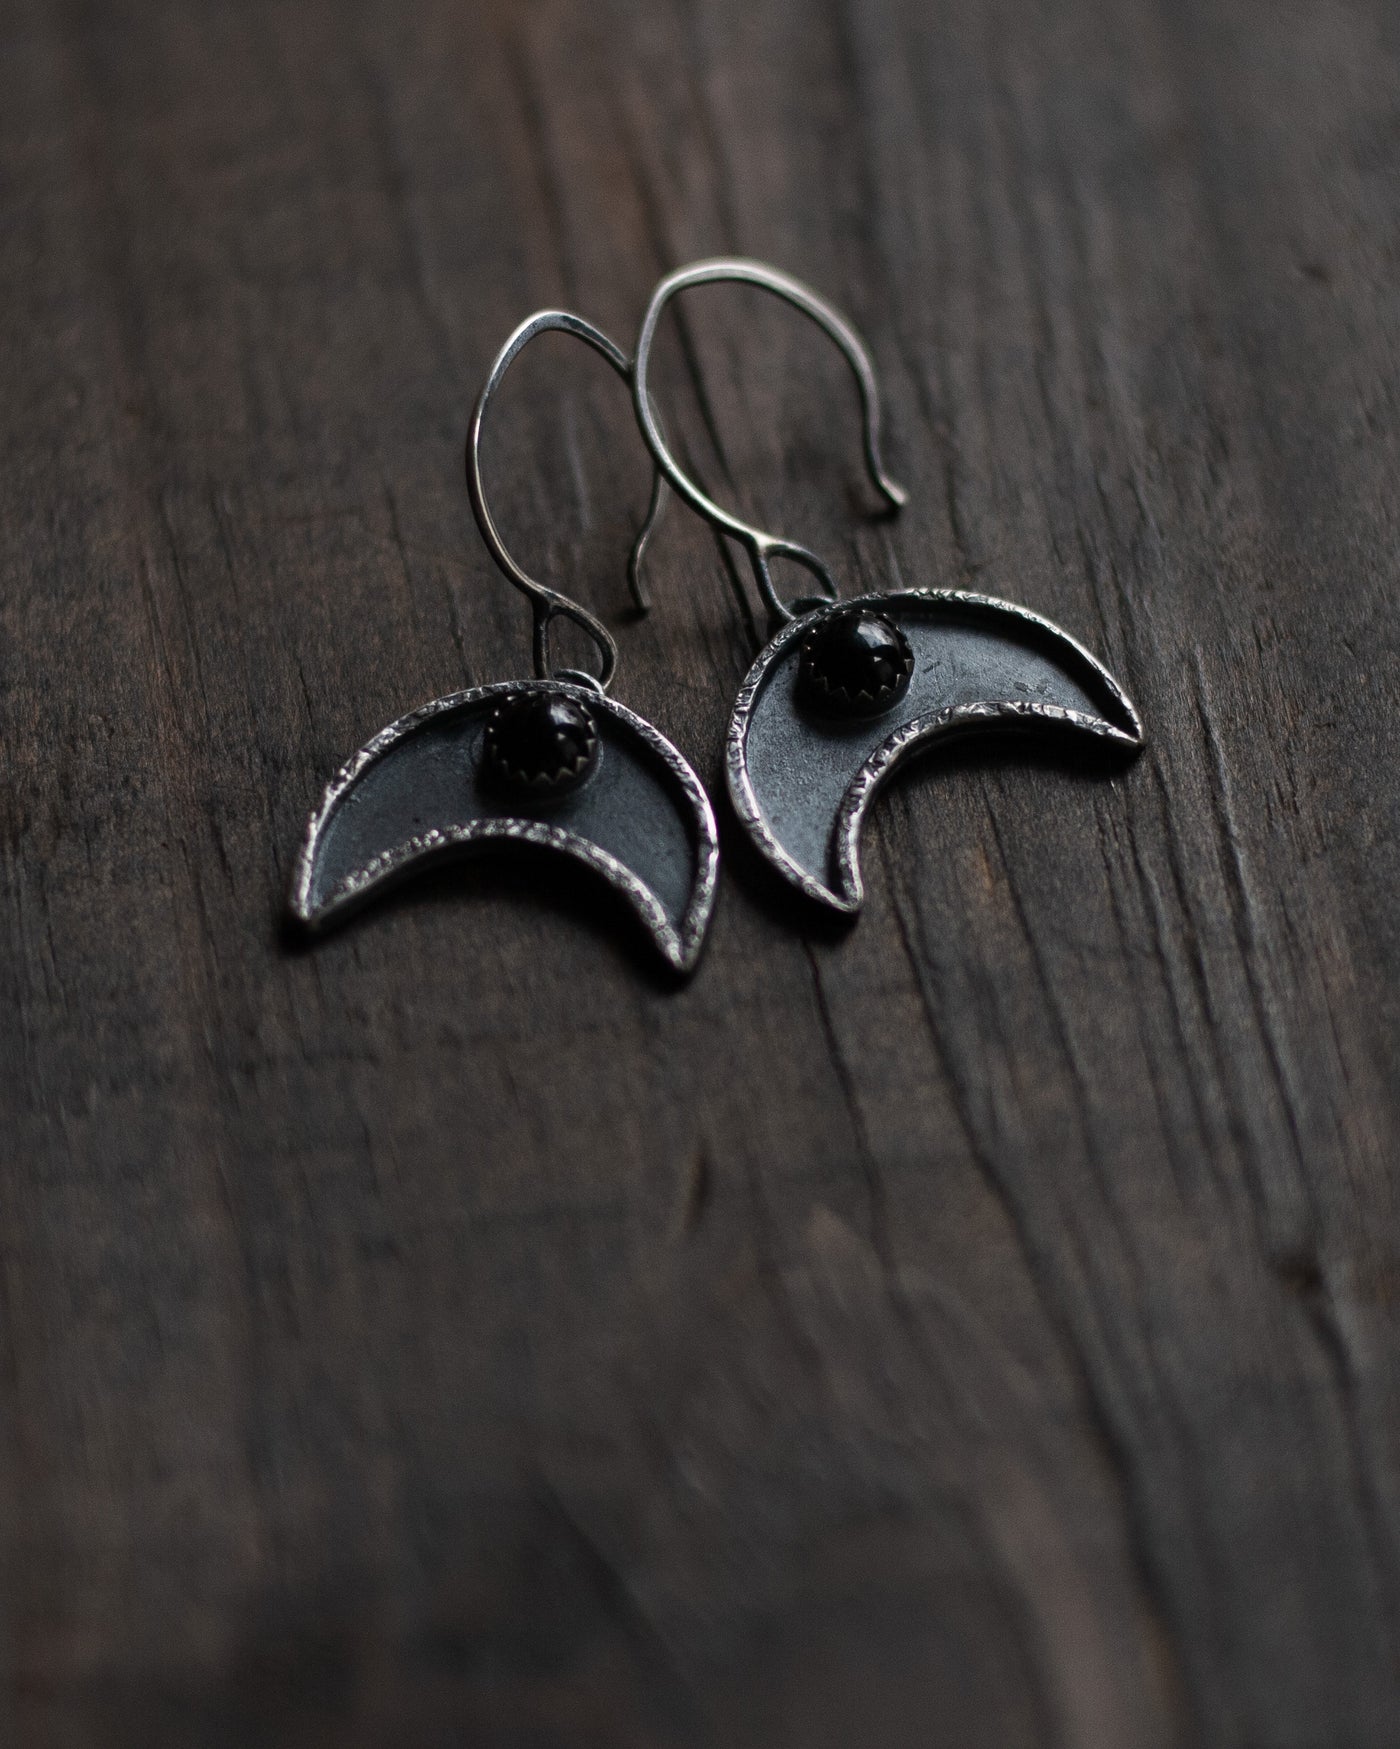 The Depths of Winter Crescent Moon Earrings  - Black Onyx